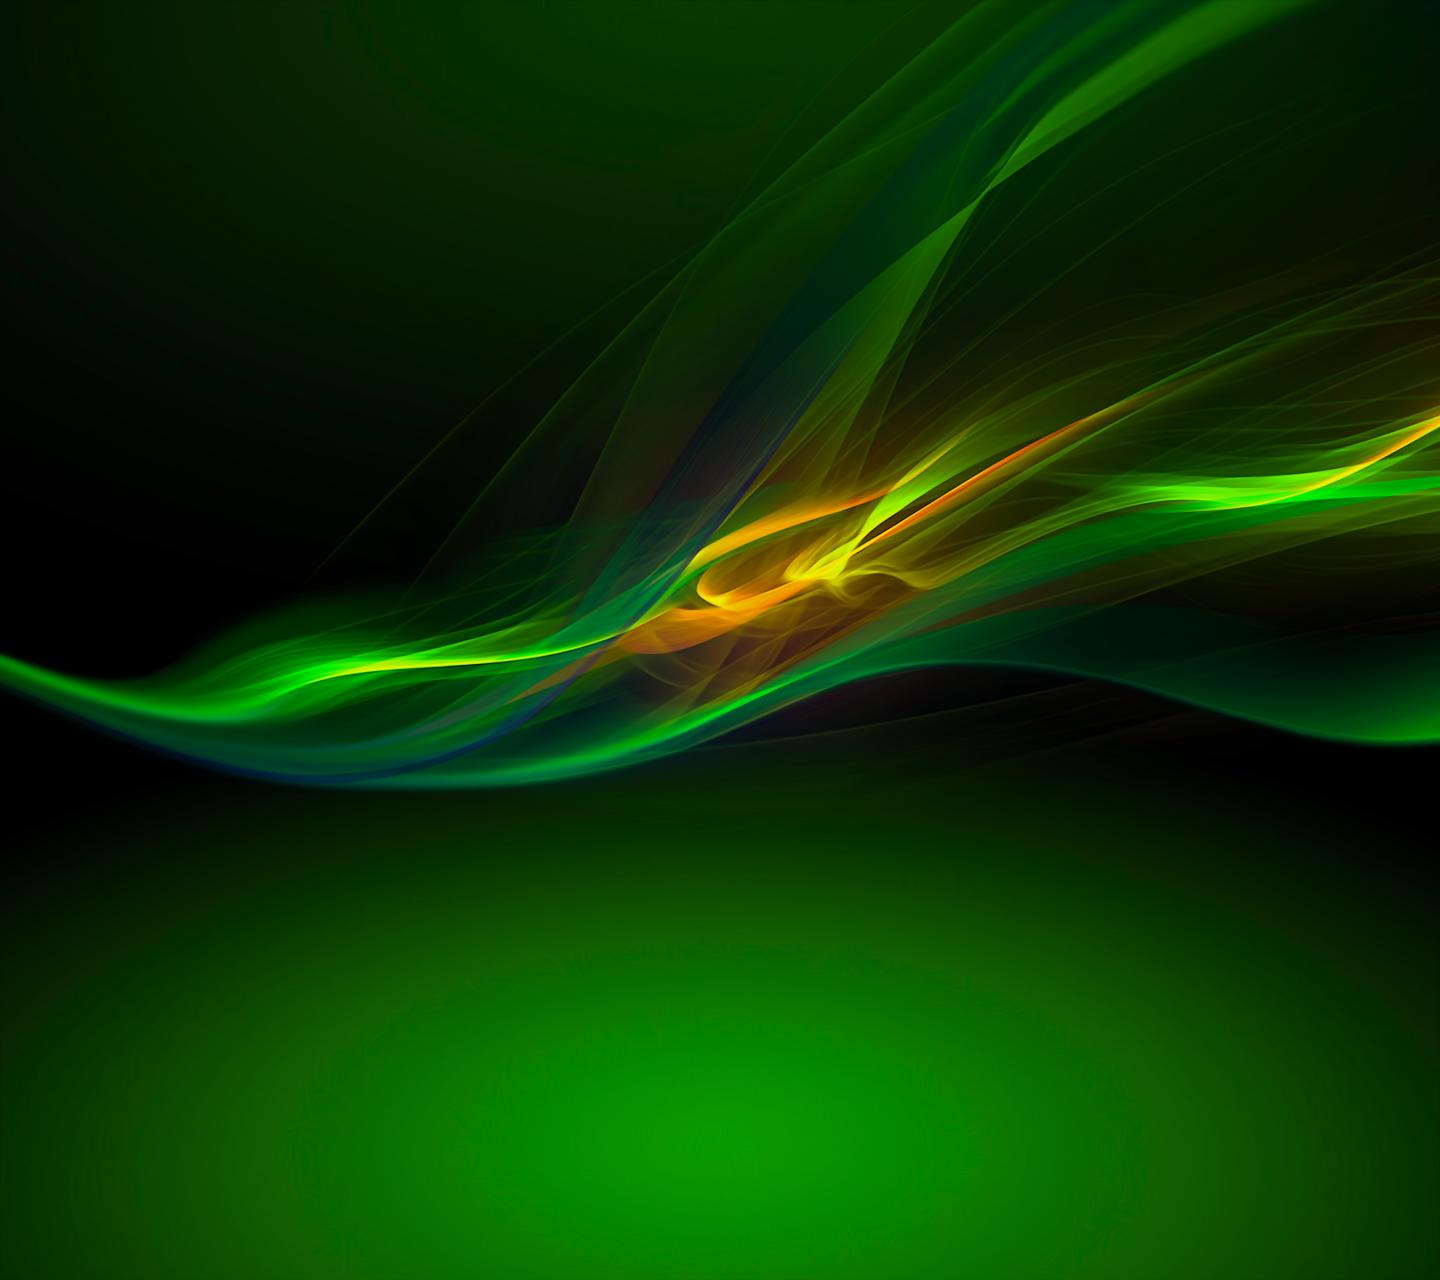 Sony Xperia Wallpapers - 1440x1280 Wallpaper 